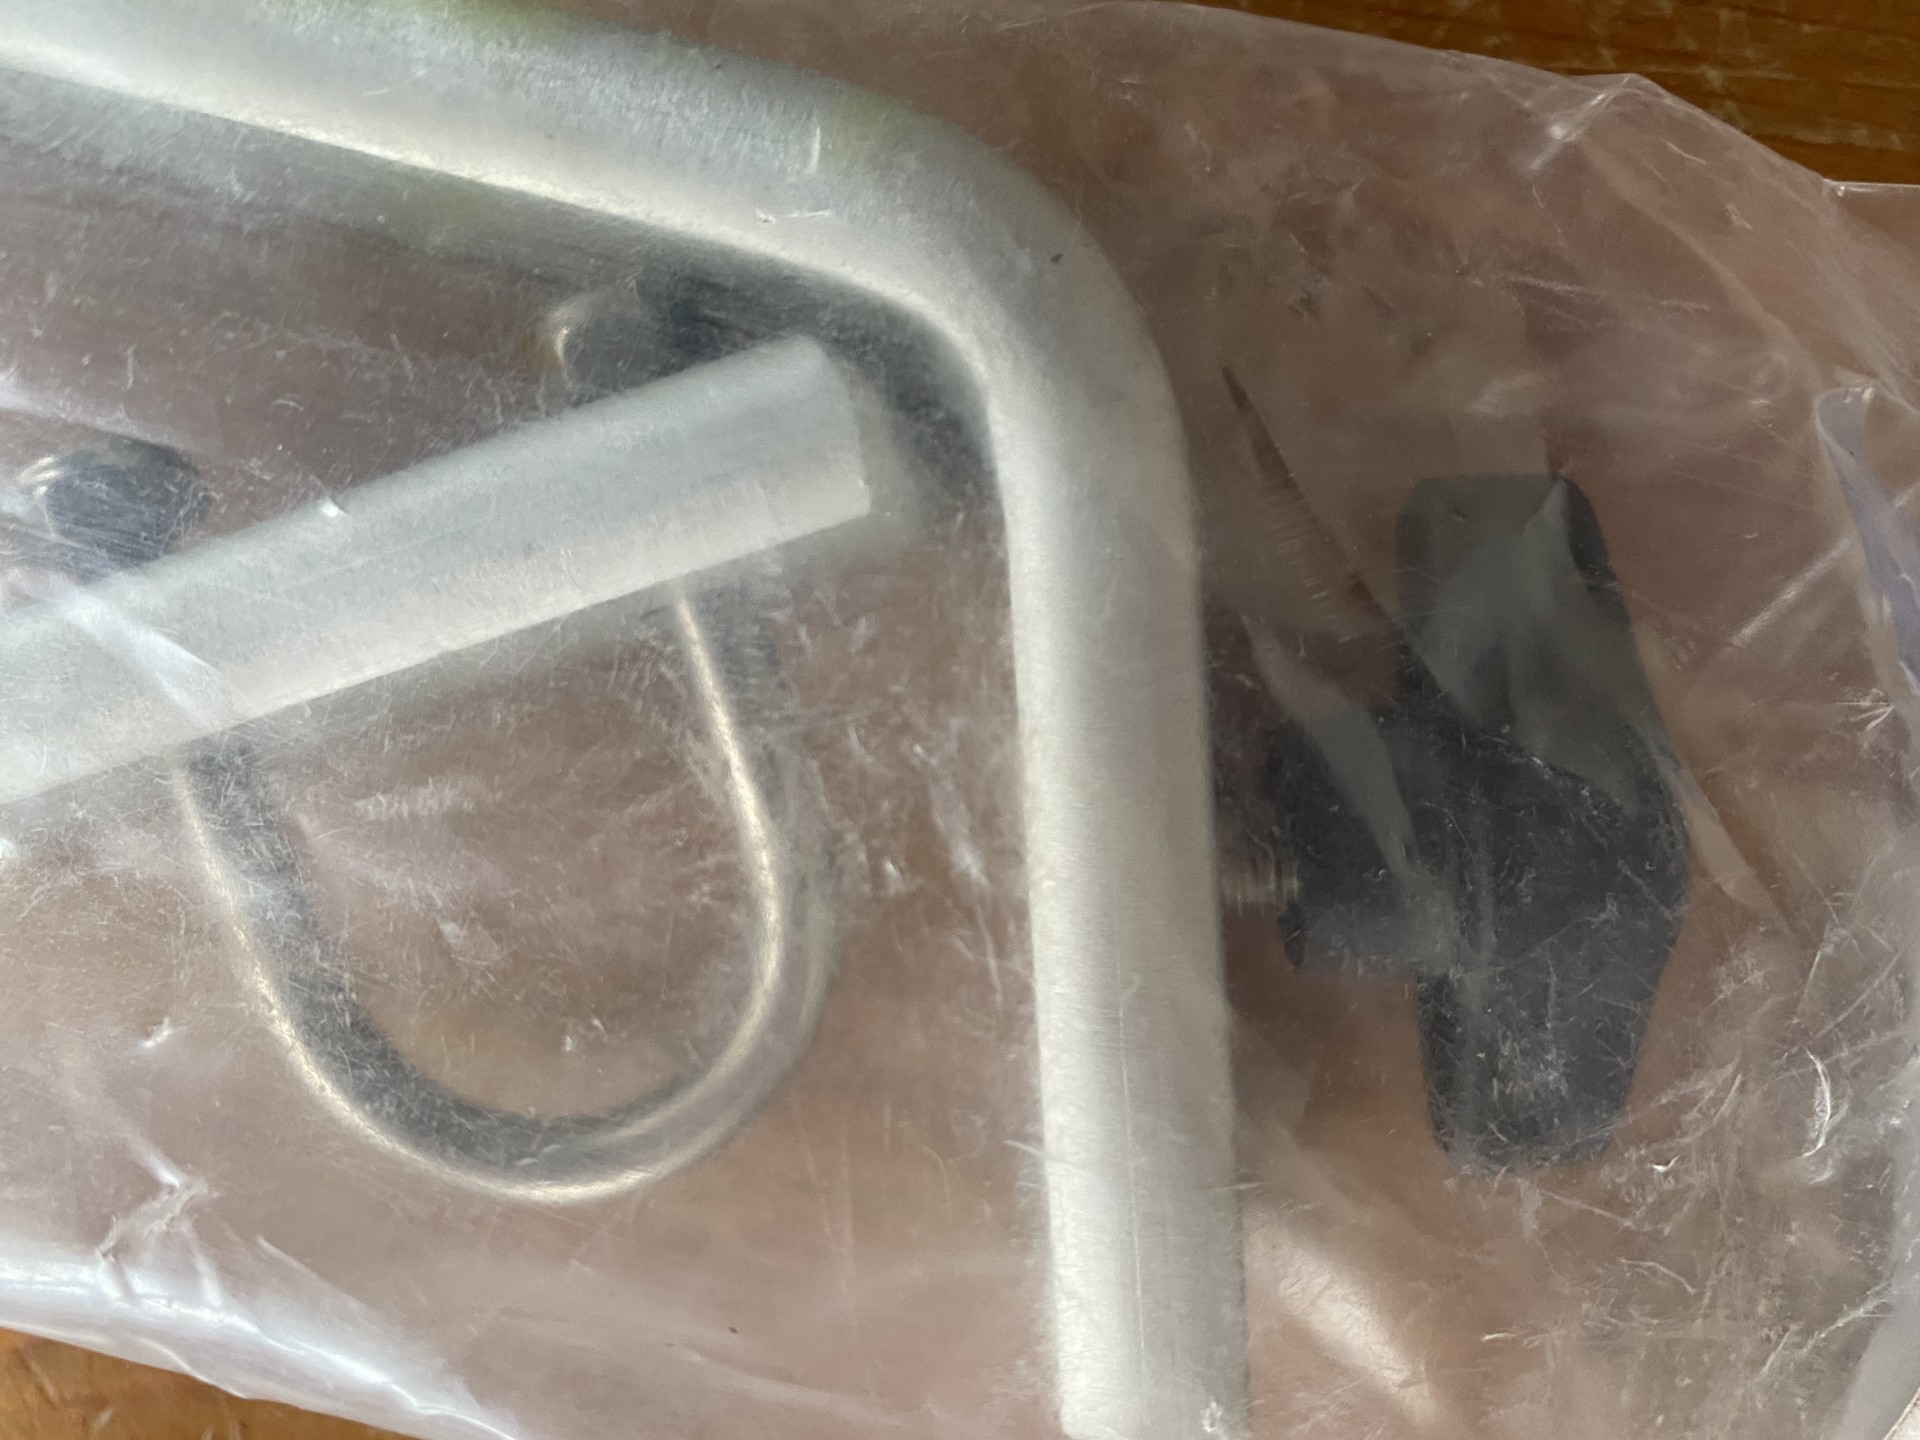 Contents of bag shows handle with bracket and finger tightener